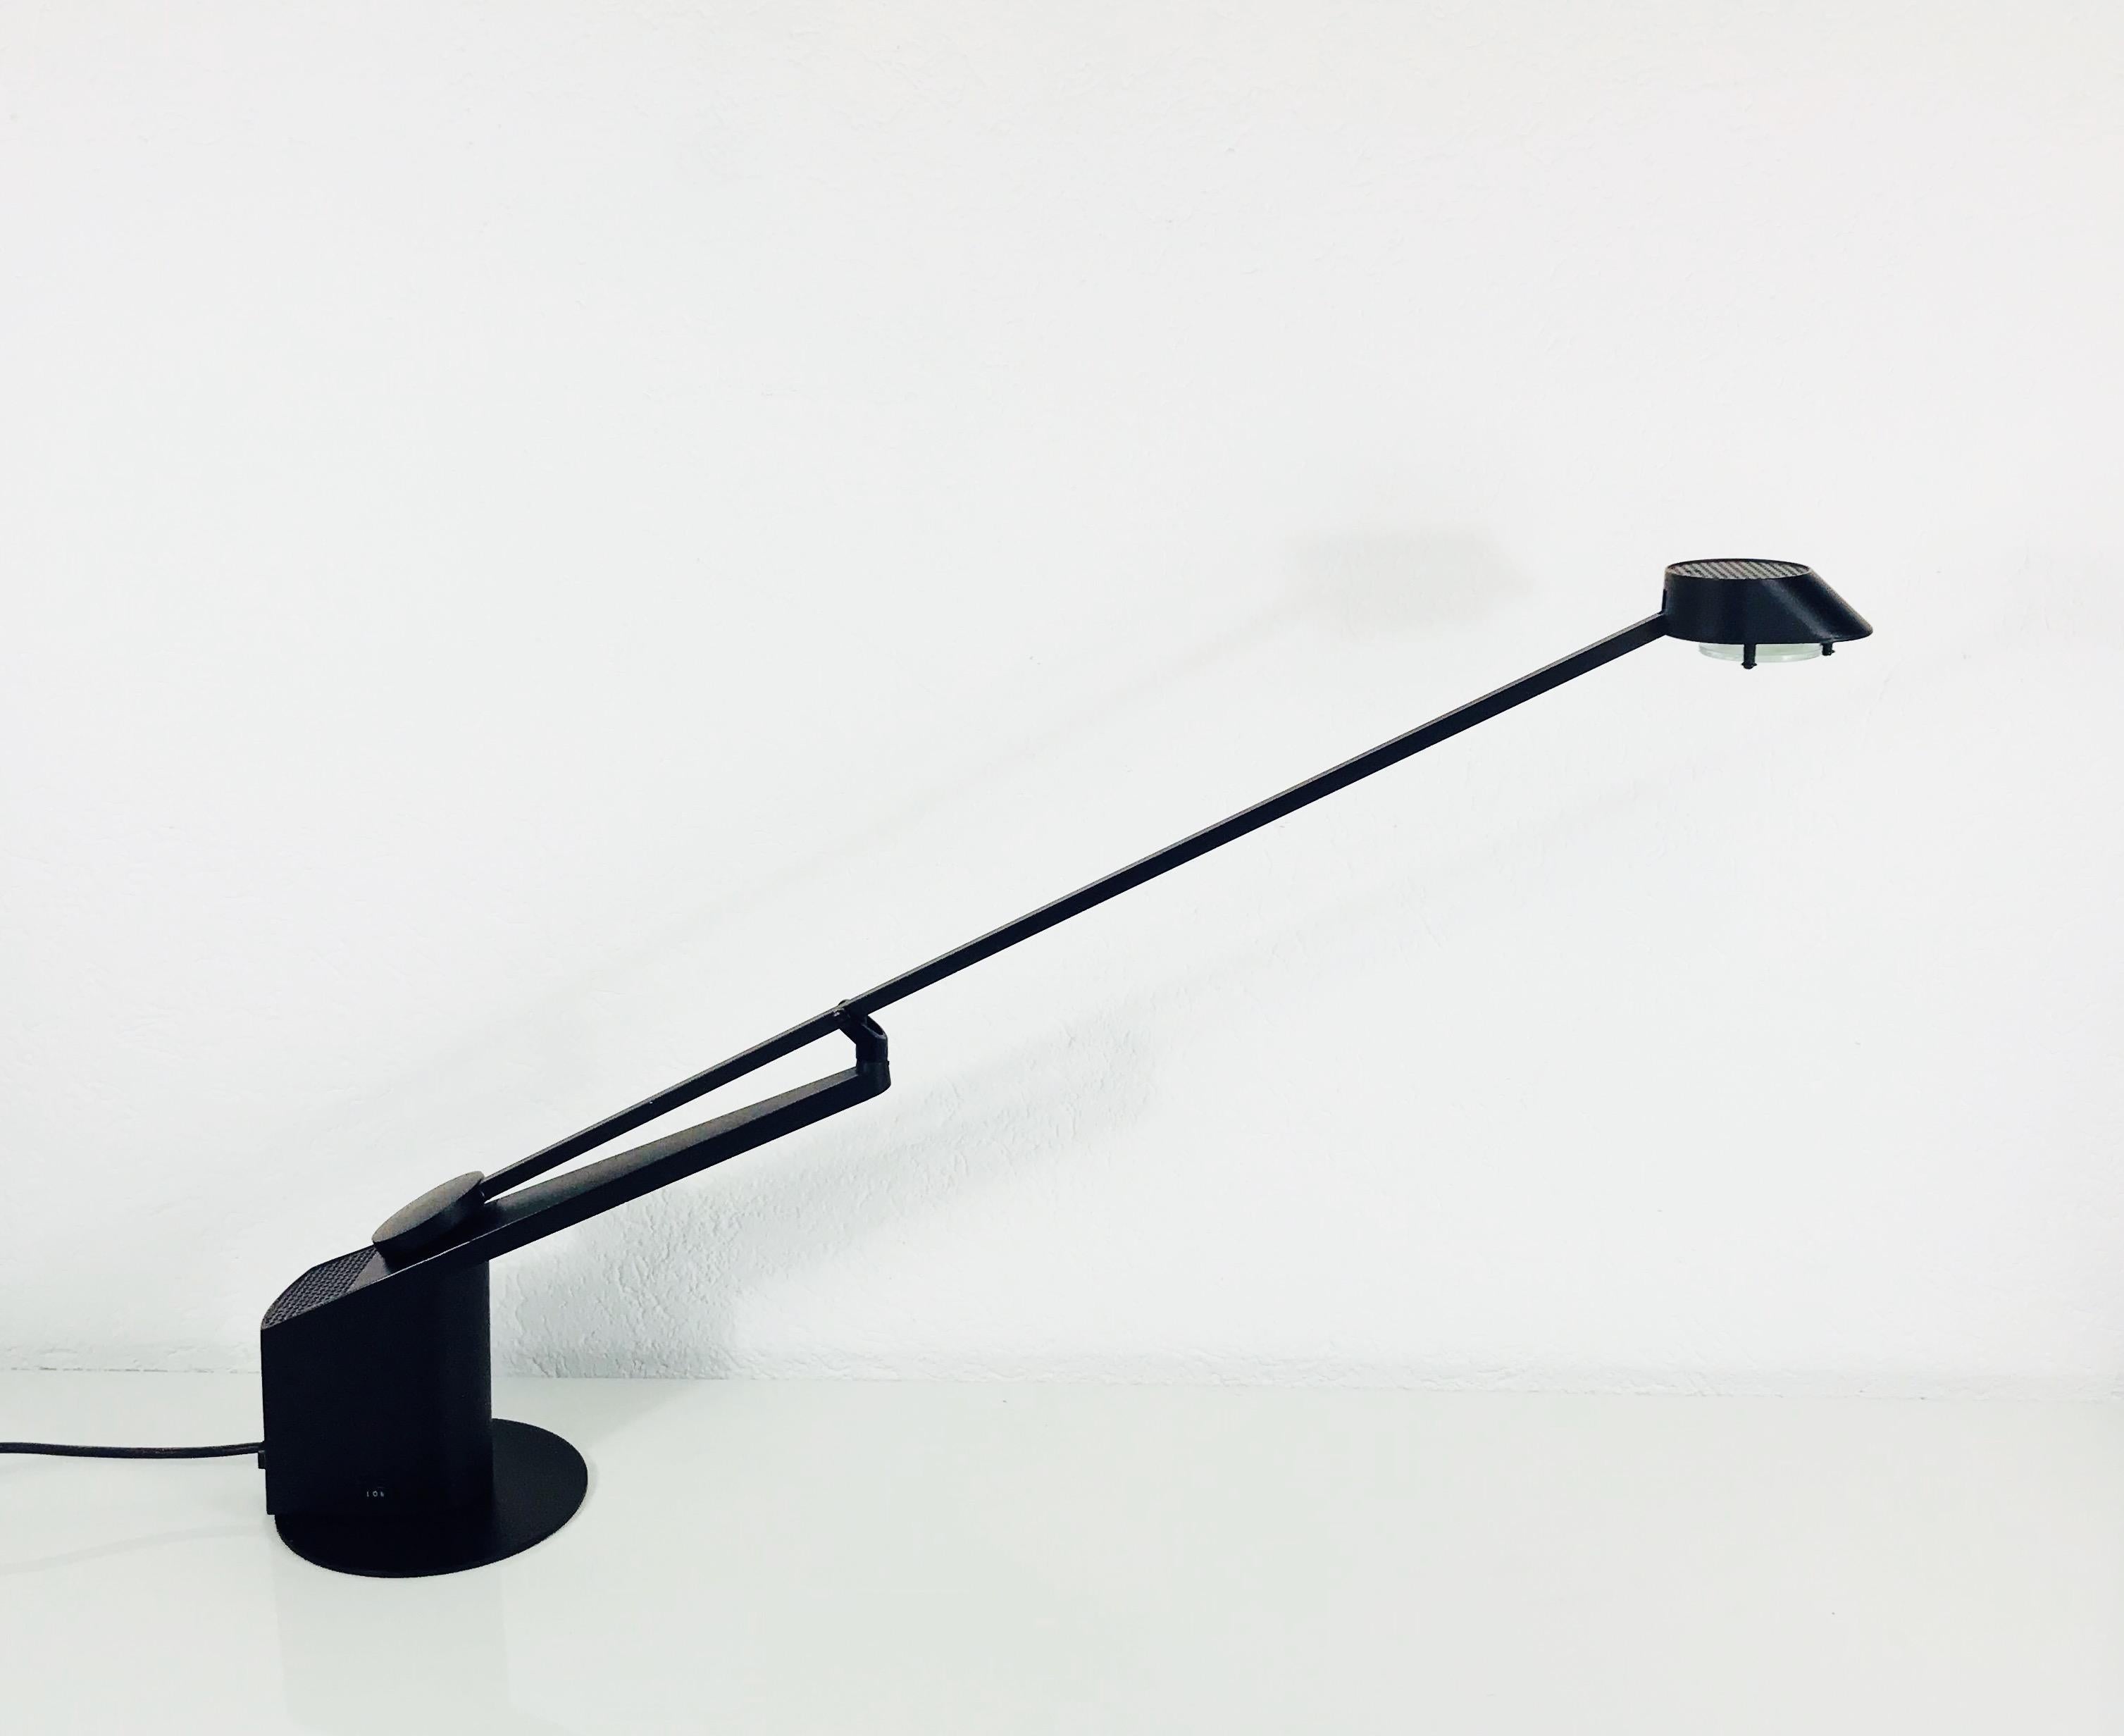 An 360 degree adjustable table lamp from Rodolfo Bonetto for the top brand Guzzini. The lamp was made and designed in Italy in 1983. It has a full black aluminum body.